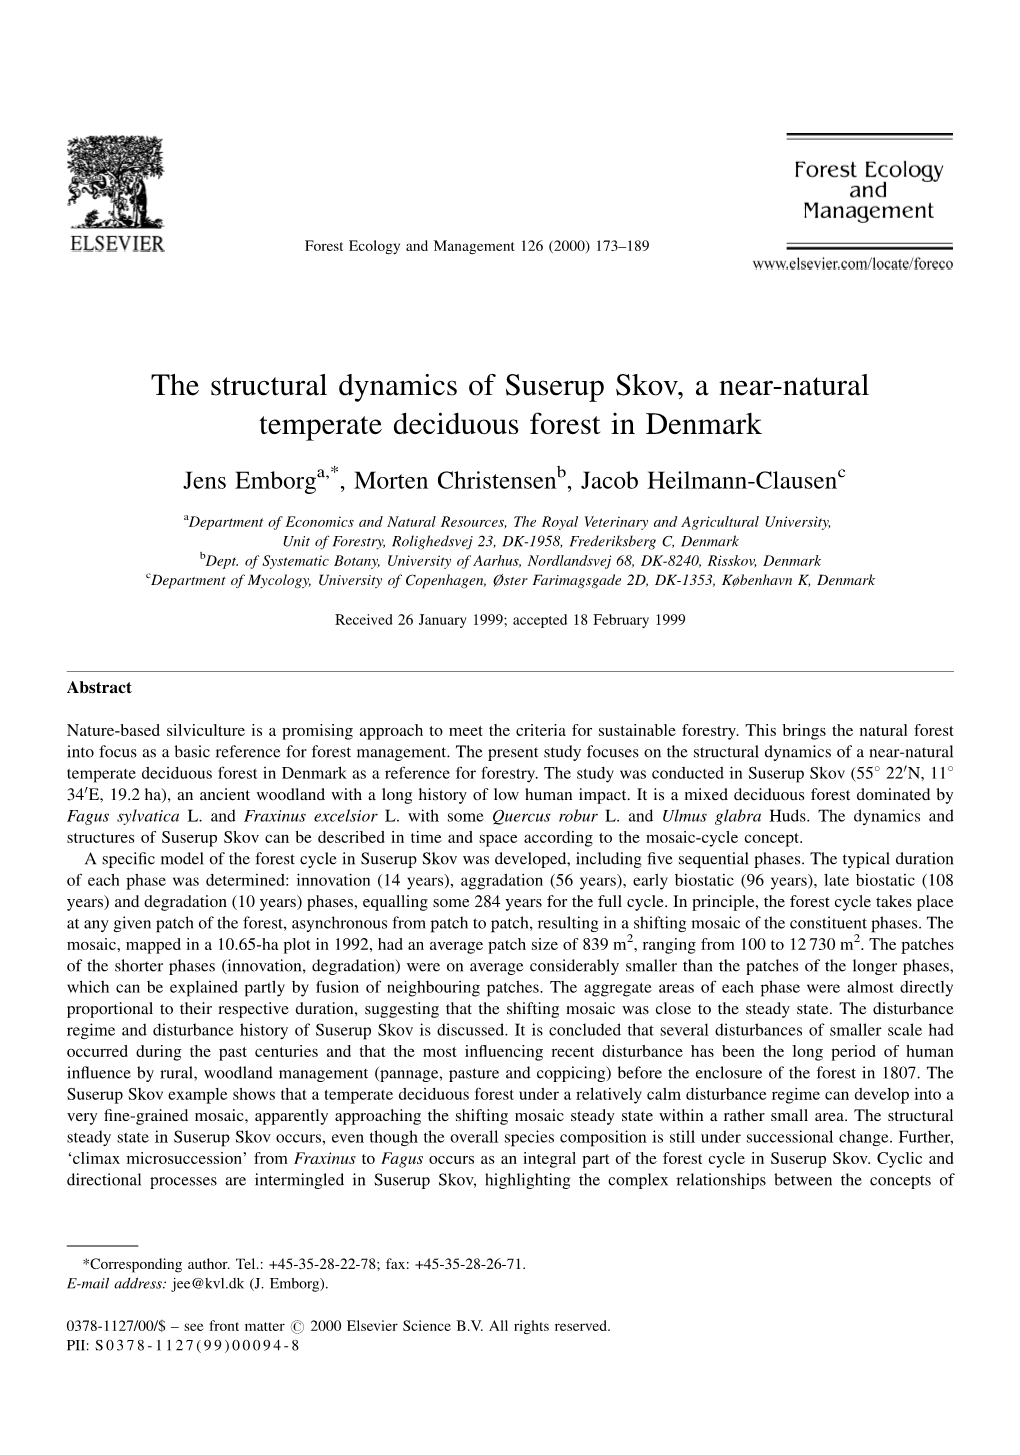 The Structural Dynamics of Suserup Skov, a Near-Natural Temperate Deciduous Forest in Denmark